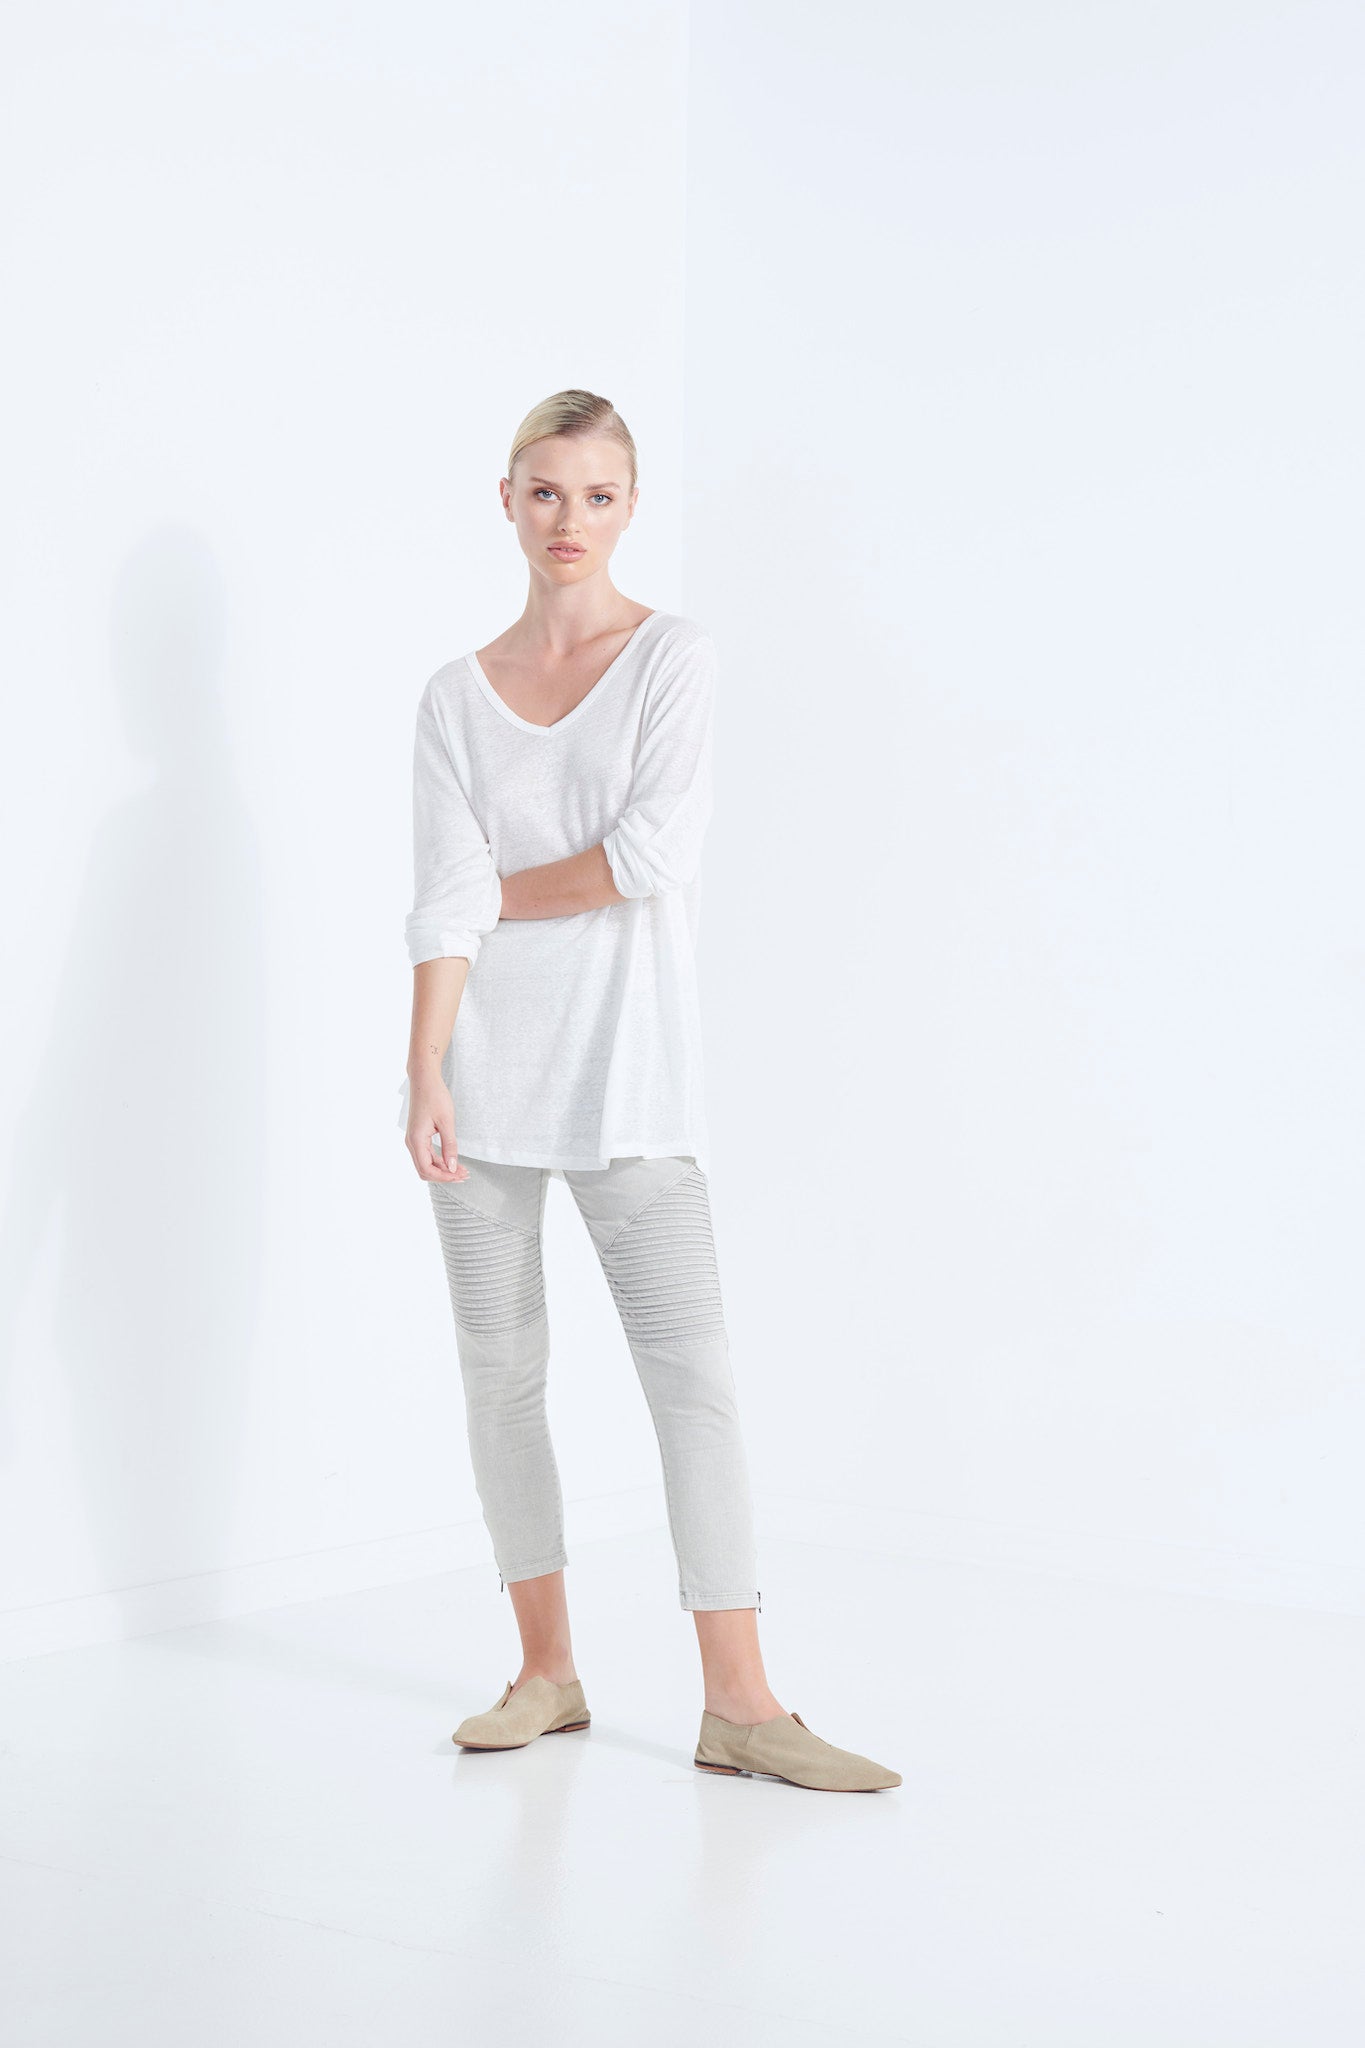 ZEUS LONG SLEEVE LINEN SCOOP V NECK TOP IN PURE LINEN MILKY ICE WHITE ROLLED SLEEVE CROSSED ARMS VIEW 